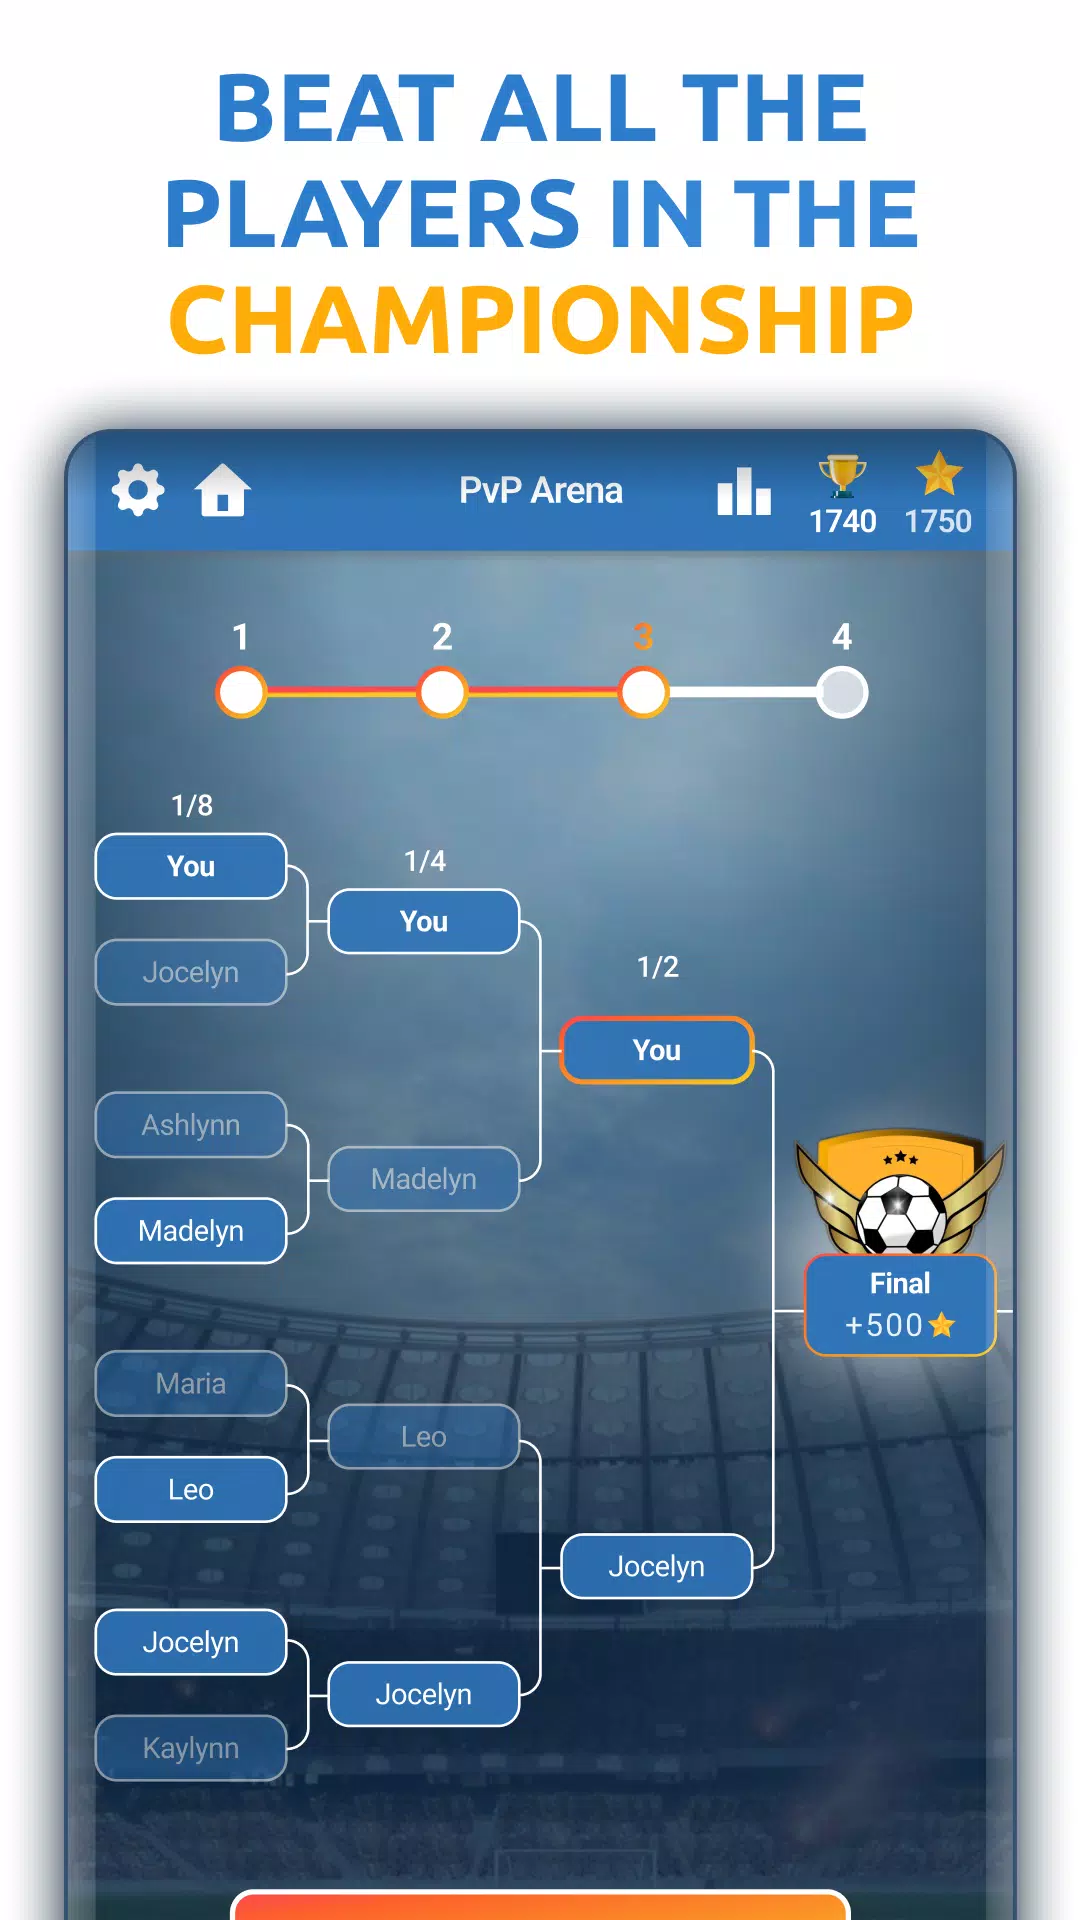 Guess Football Team 2020-2021 - Football Quiz APK pour Android Télécharger